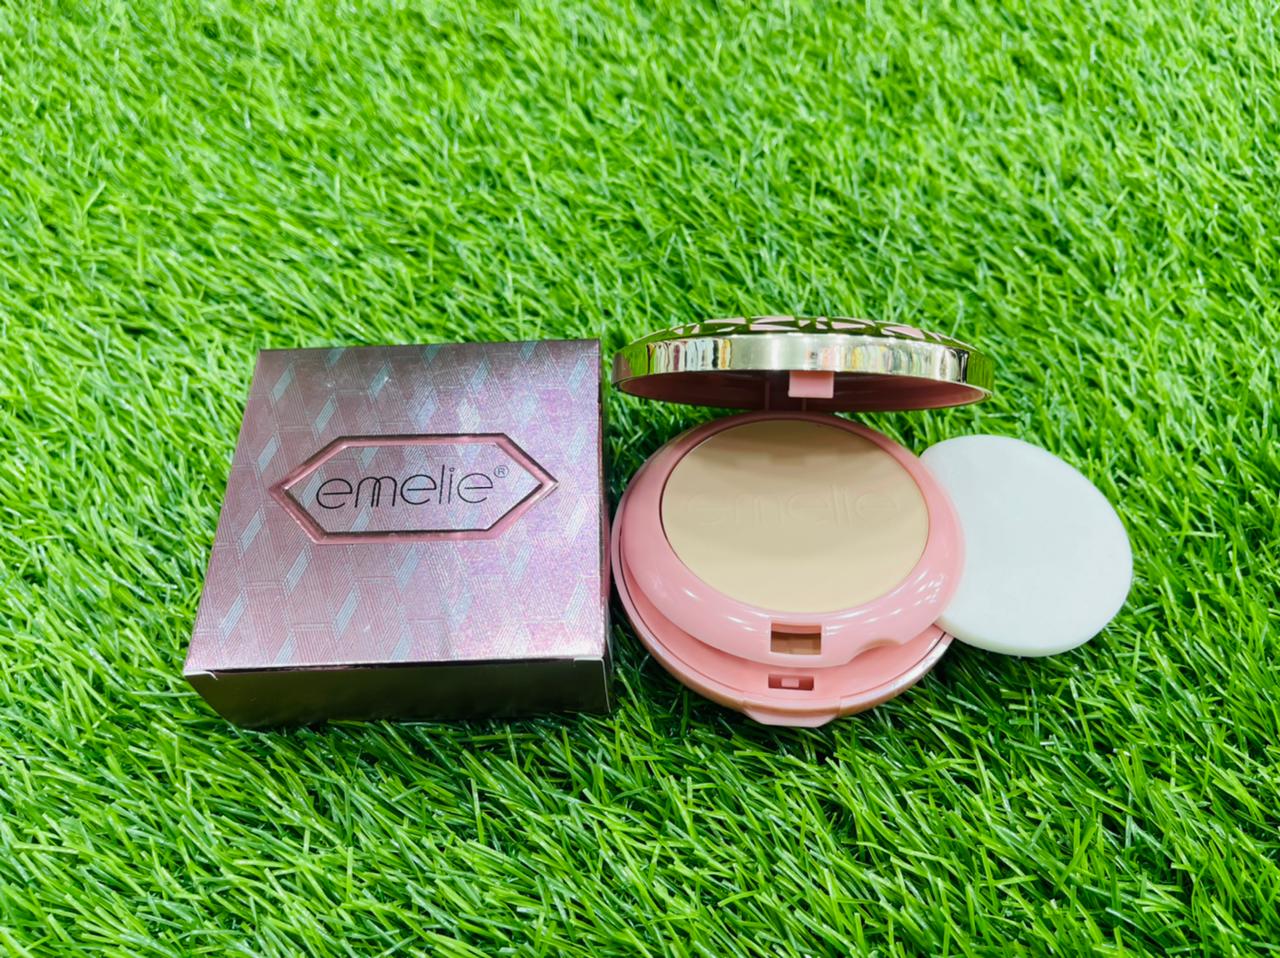 EMELIE OUTER PINK STYLE MAKEUP COMPACT POWDER